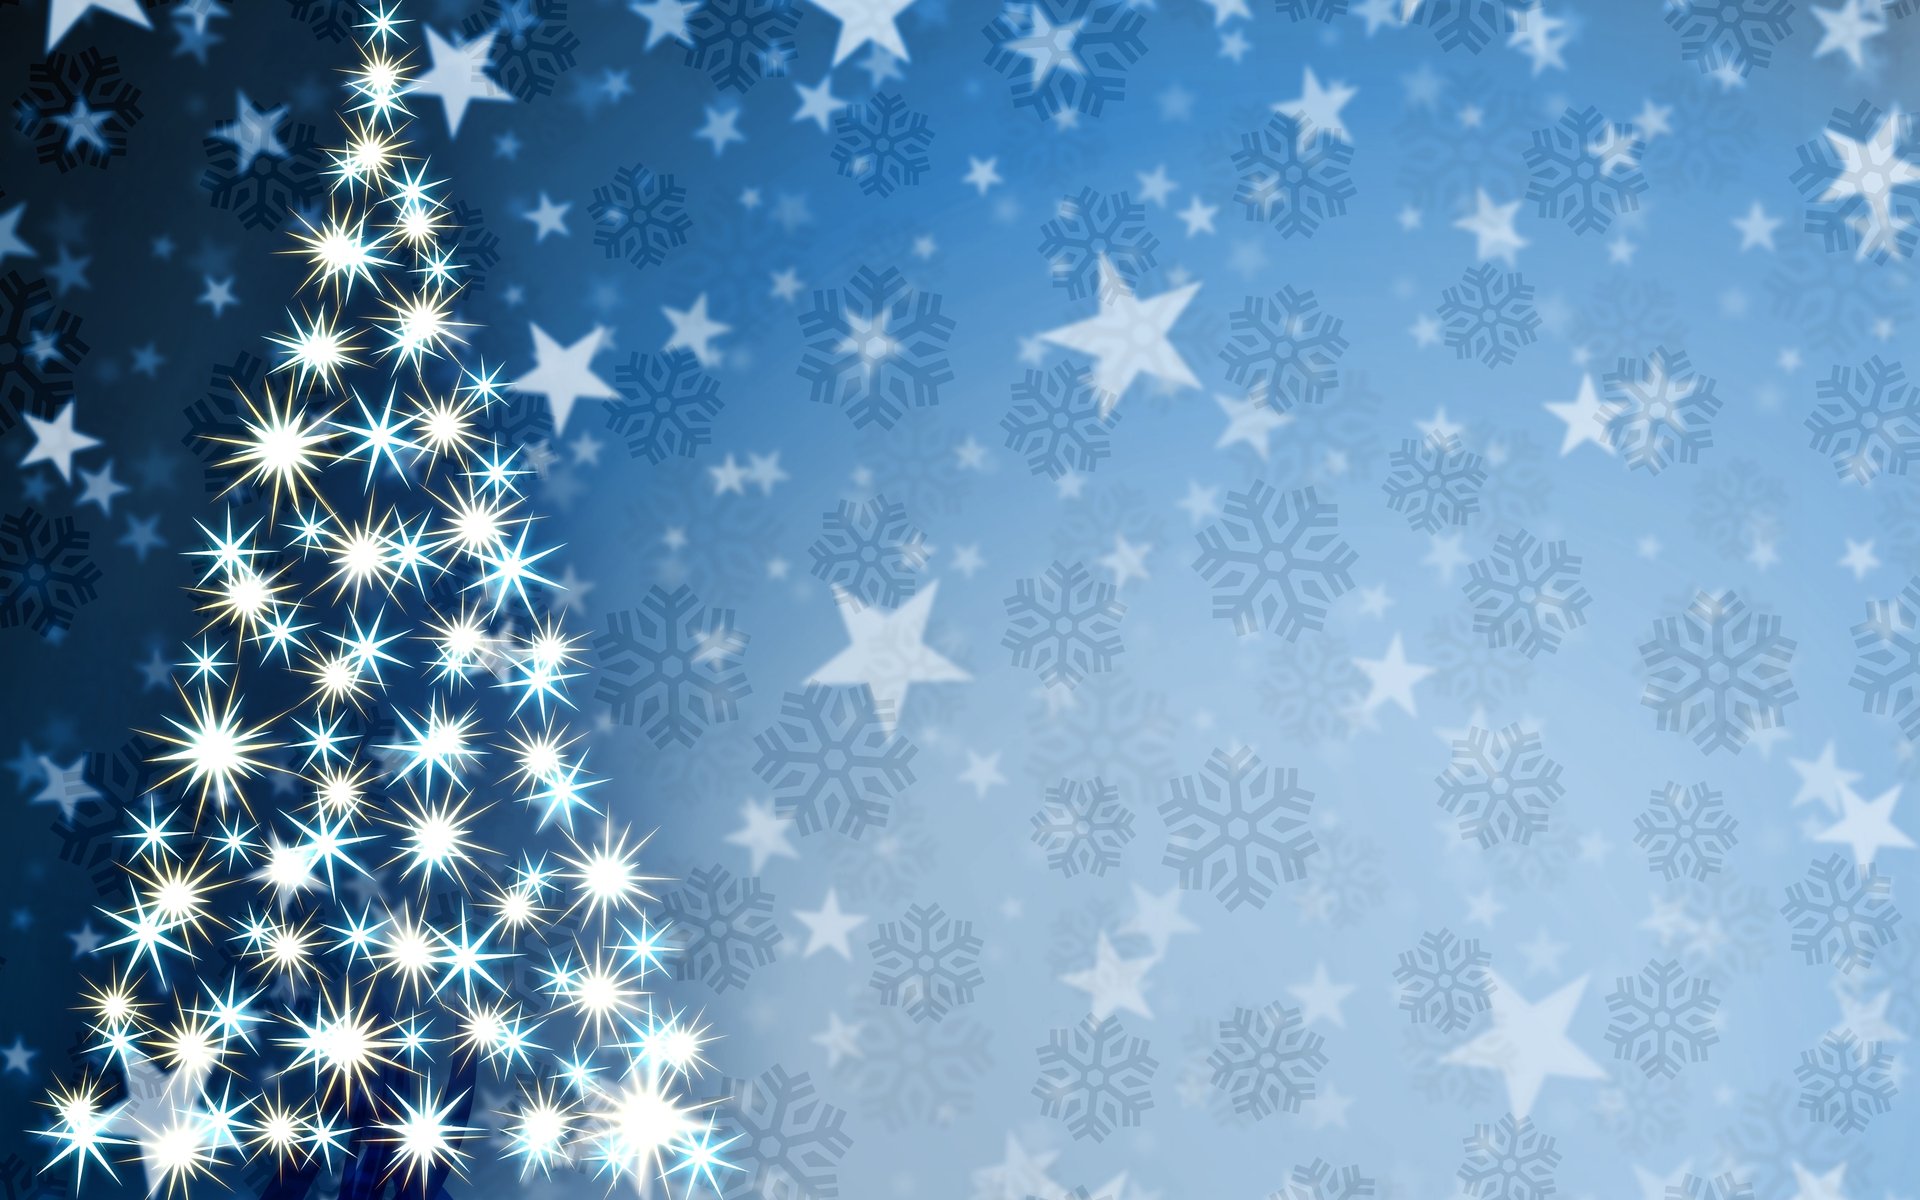 Free photo New Year`s cold background with Christmas tree and stars